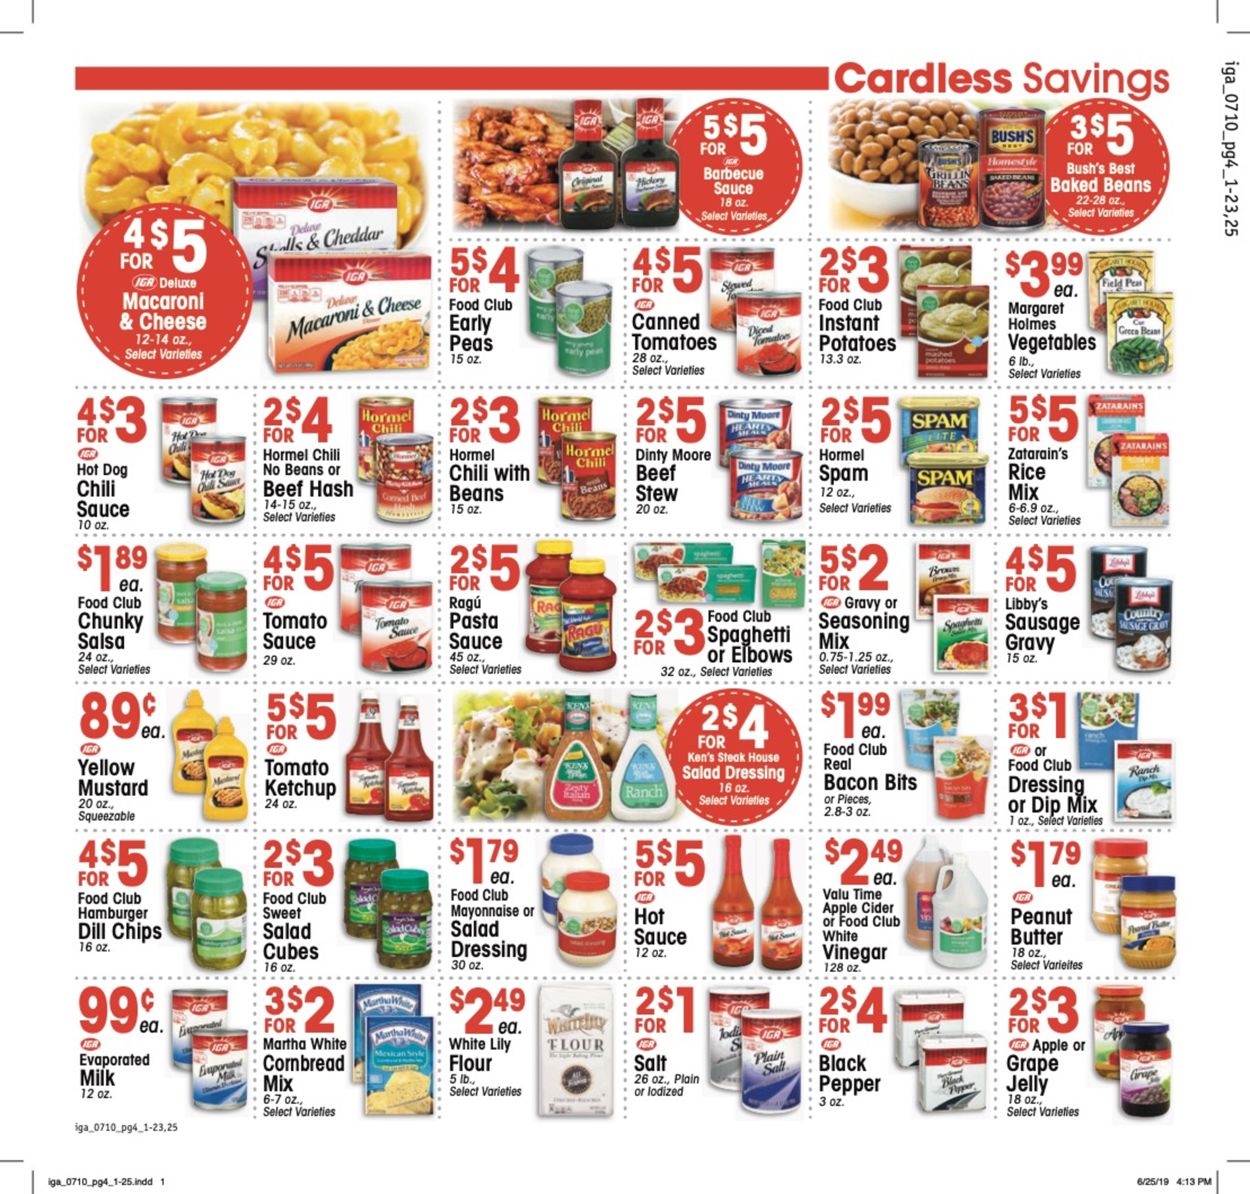 IGA Ad from 07/10/2019